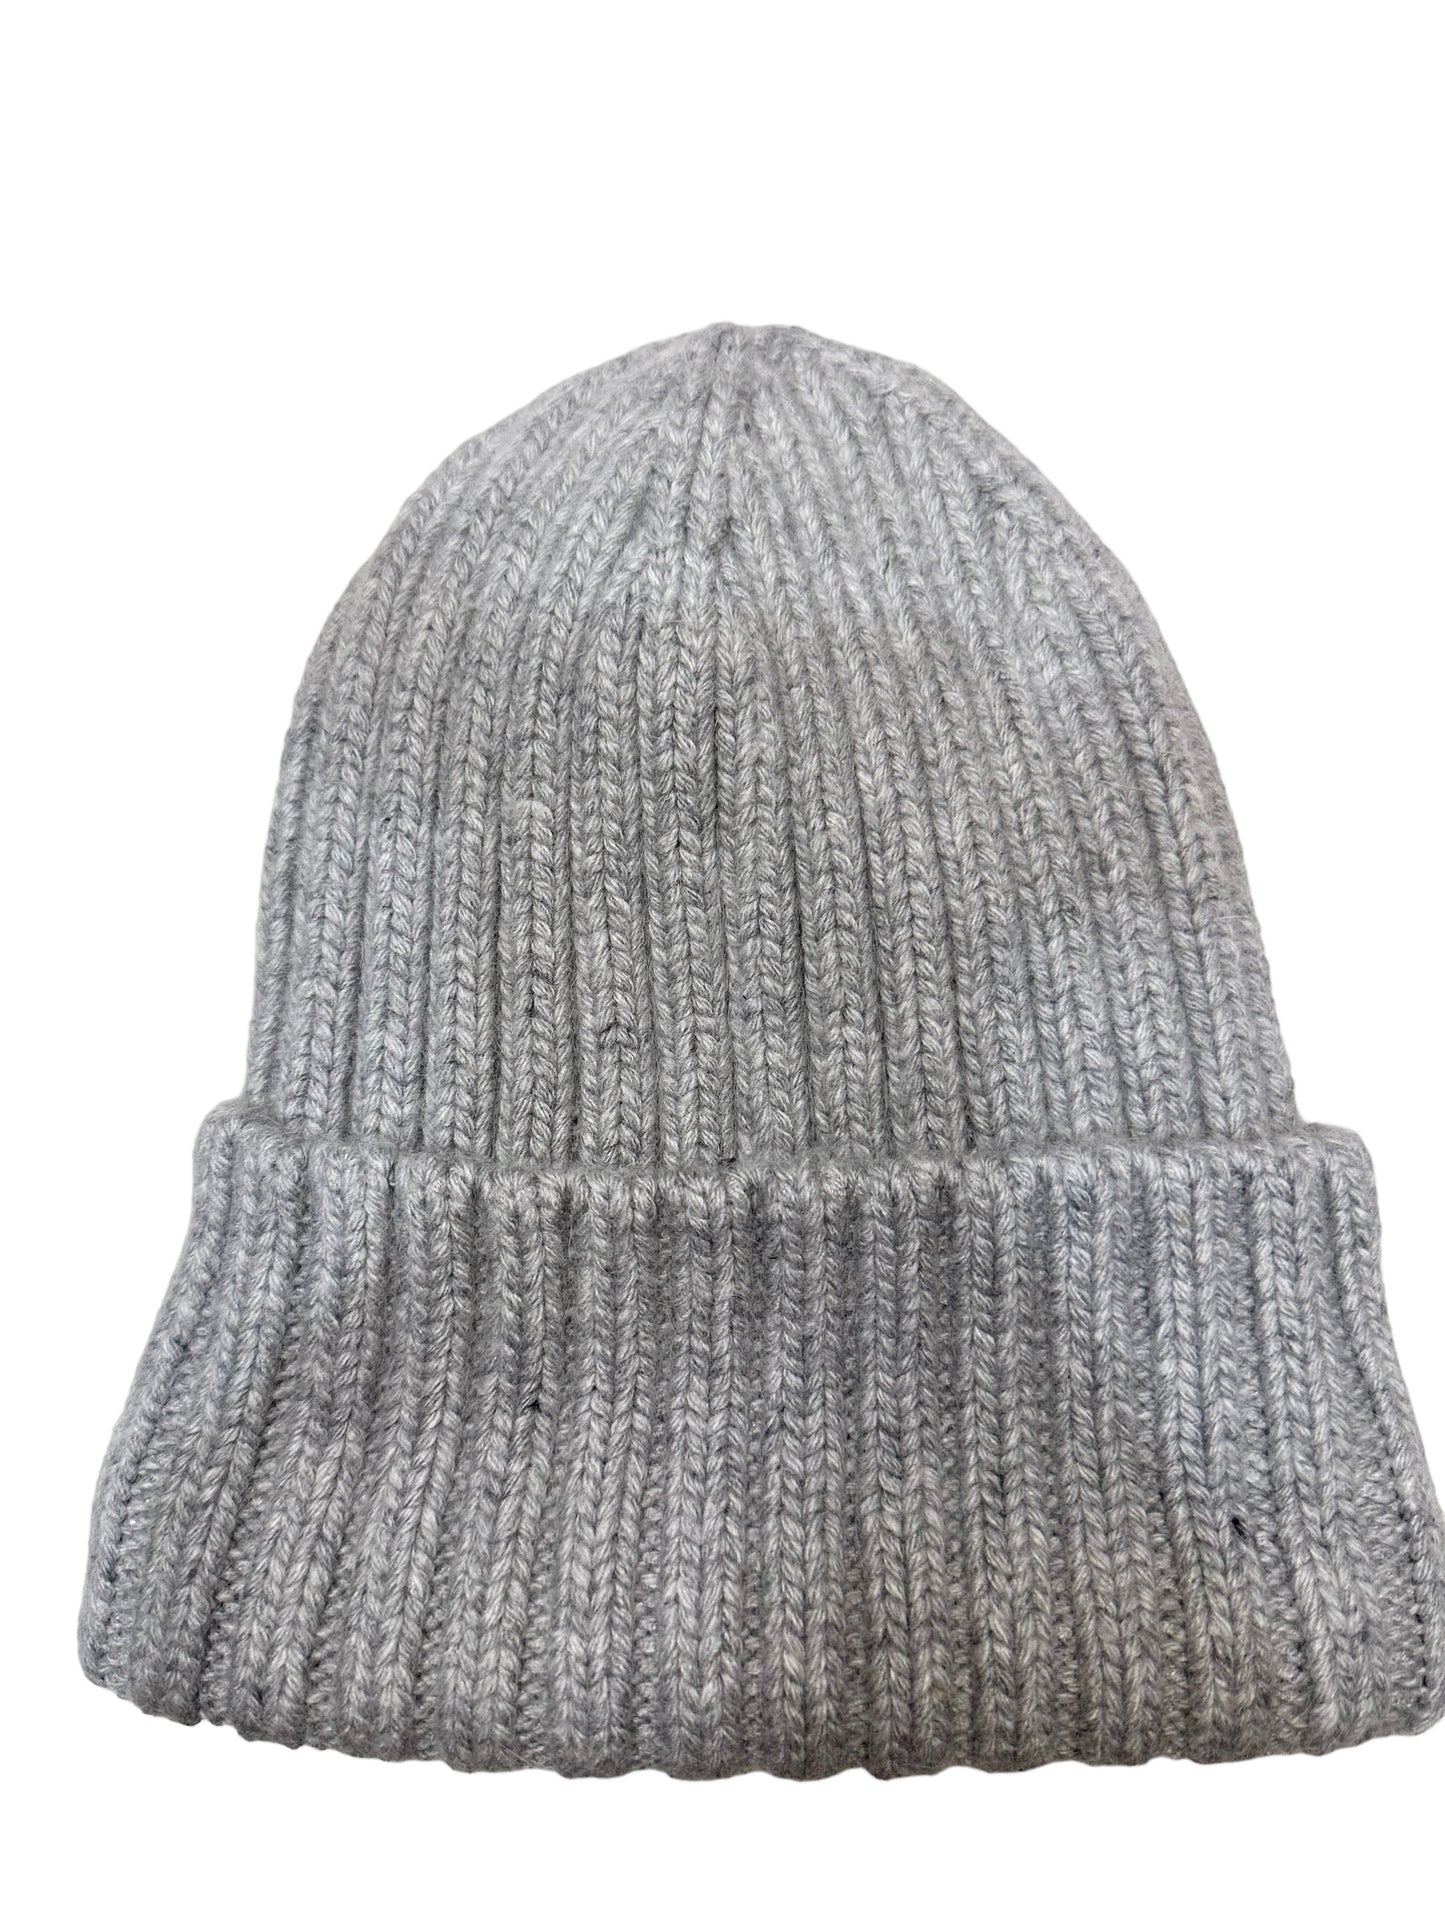 Luxury Unisex Silk Lined Beanie | Great hair protection